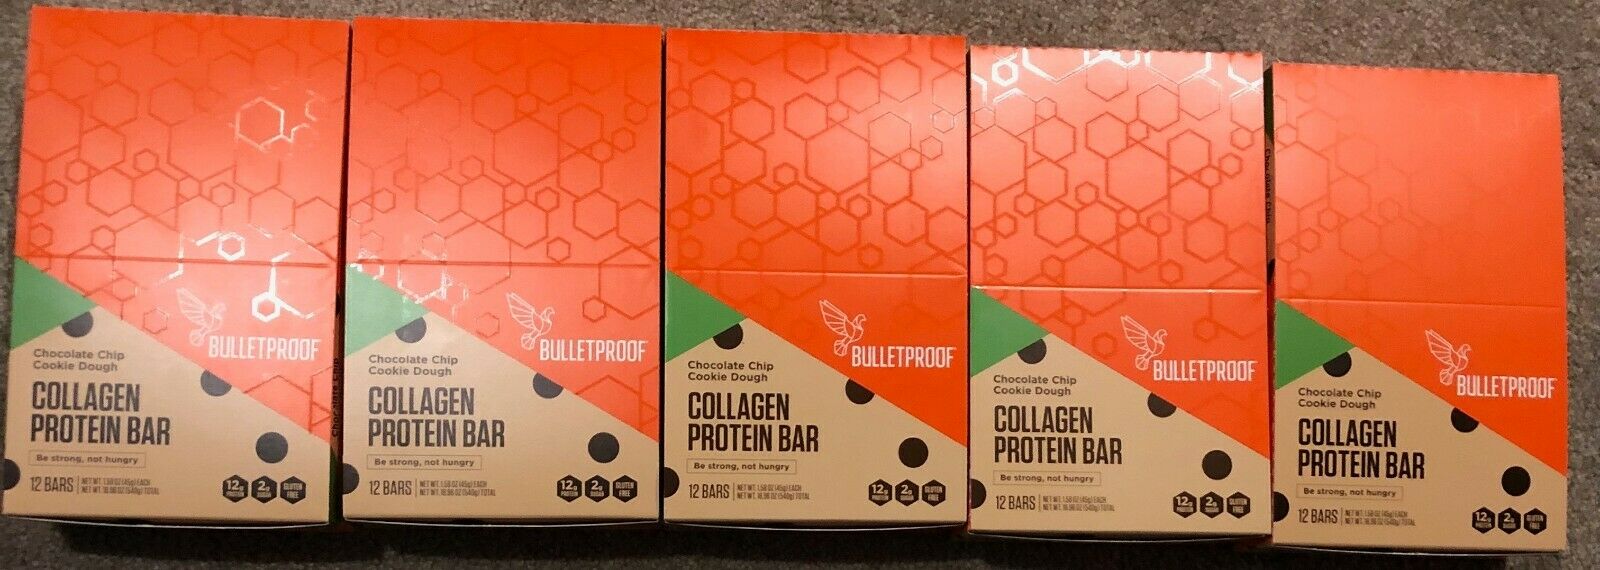 Bulletproof Collagen Protein Bars, Chocolate Chip Cookie Dough 60 Bars (5 Boxes)